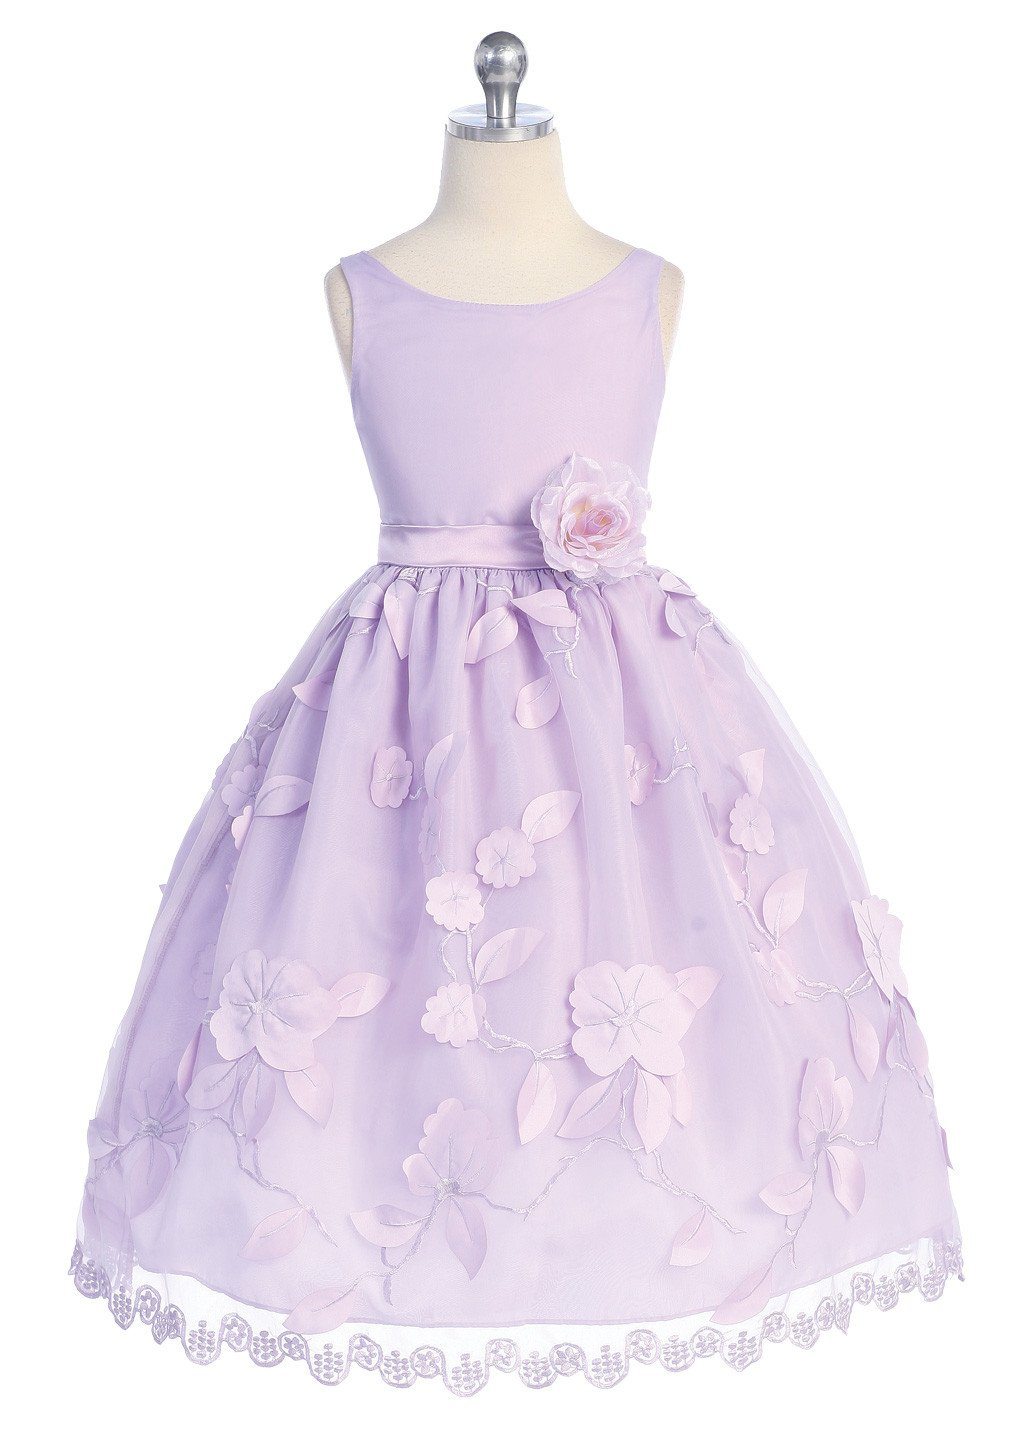 Pink Flower Girl Dresses with Floral Embroidery - 4 Colors-Girls Formal Dresses-ABC Fashion